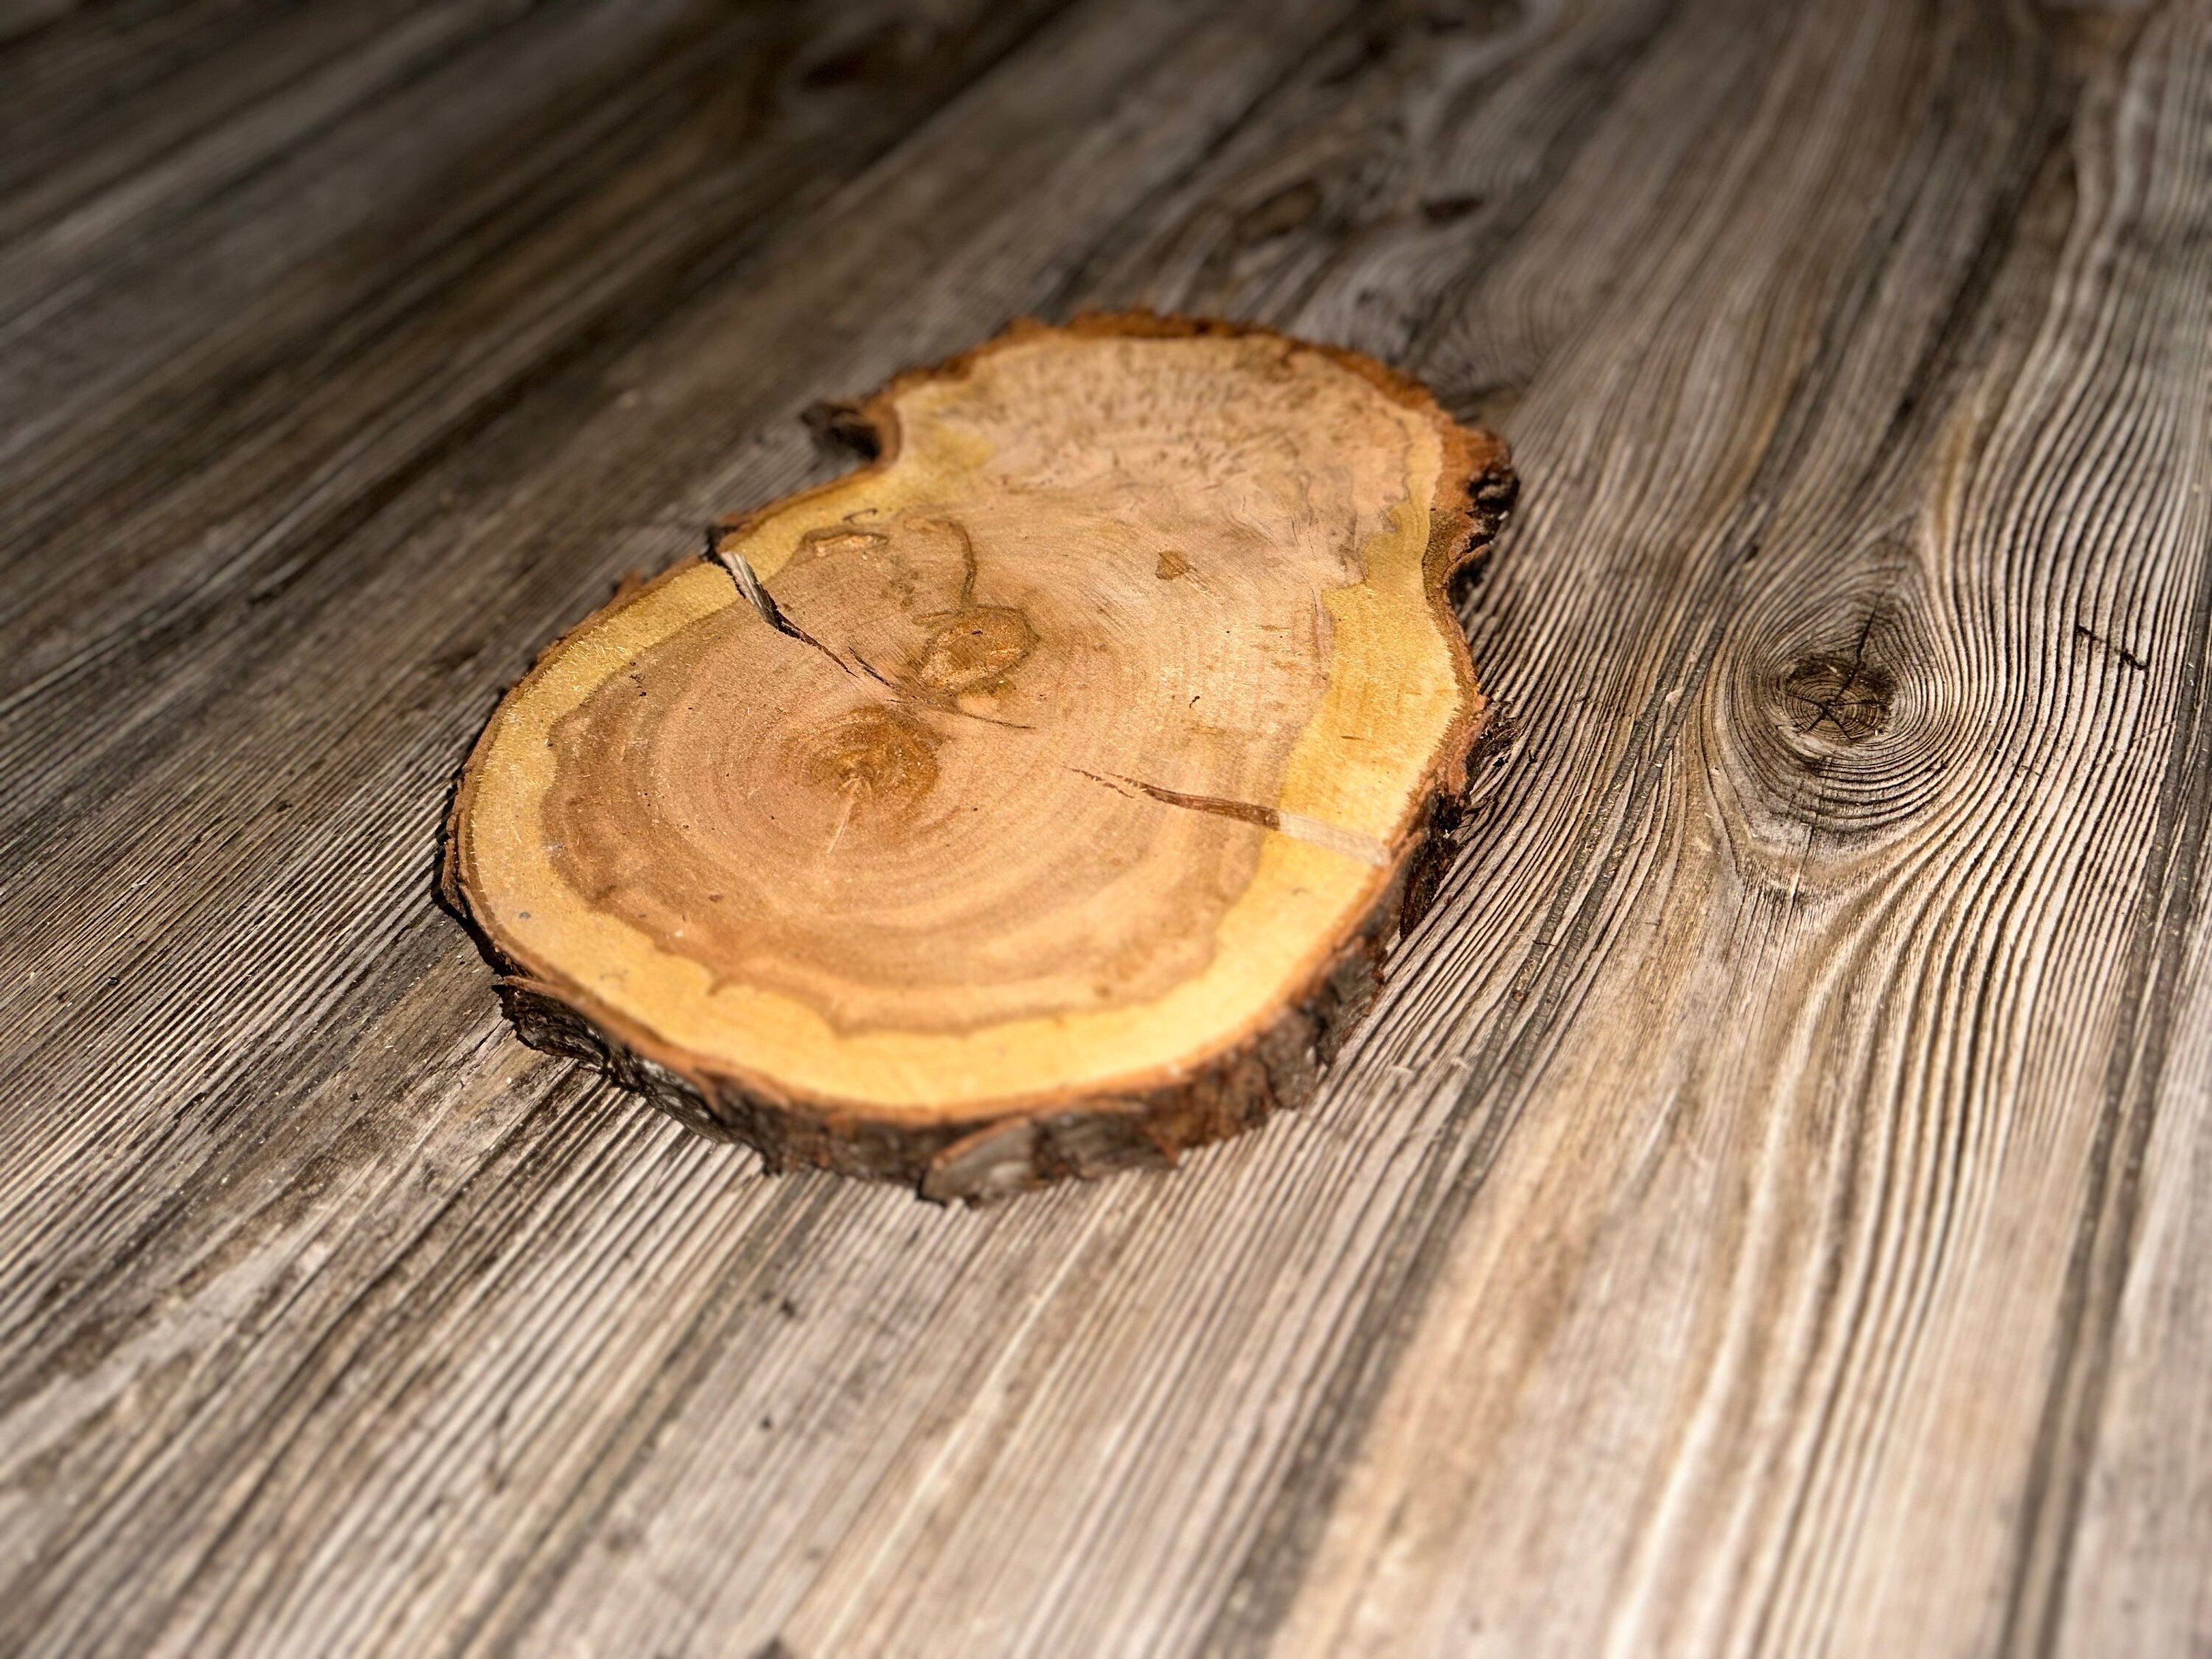 Single Cherry Burl Slice, Approximately 9.5 Inches Long by 7.5 Inches Wide and 1 Inch Thick